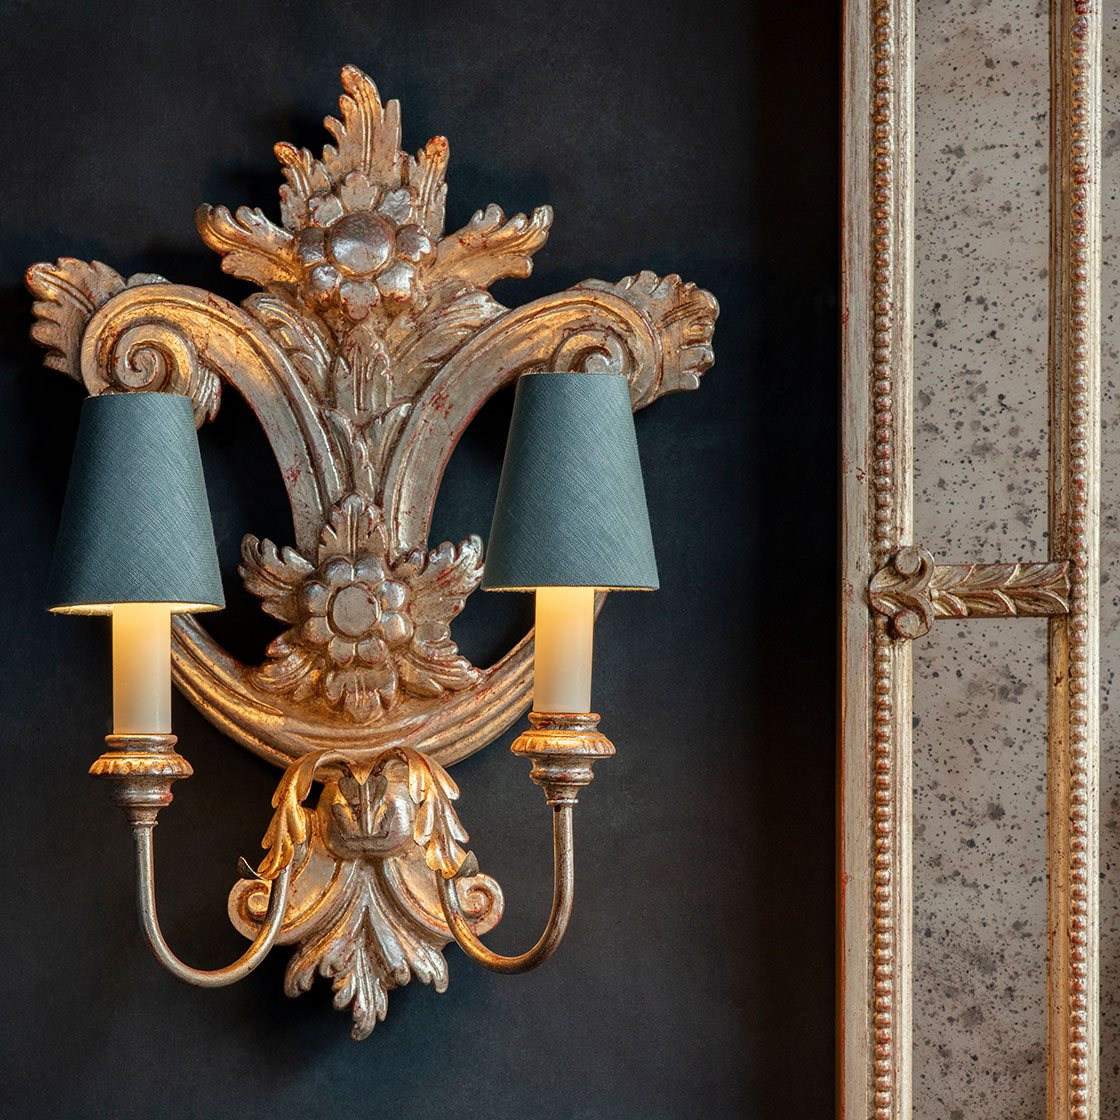 Baroque light in Antiqued silver - Beaumont & Fletcher